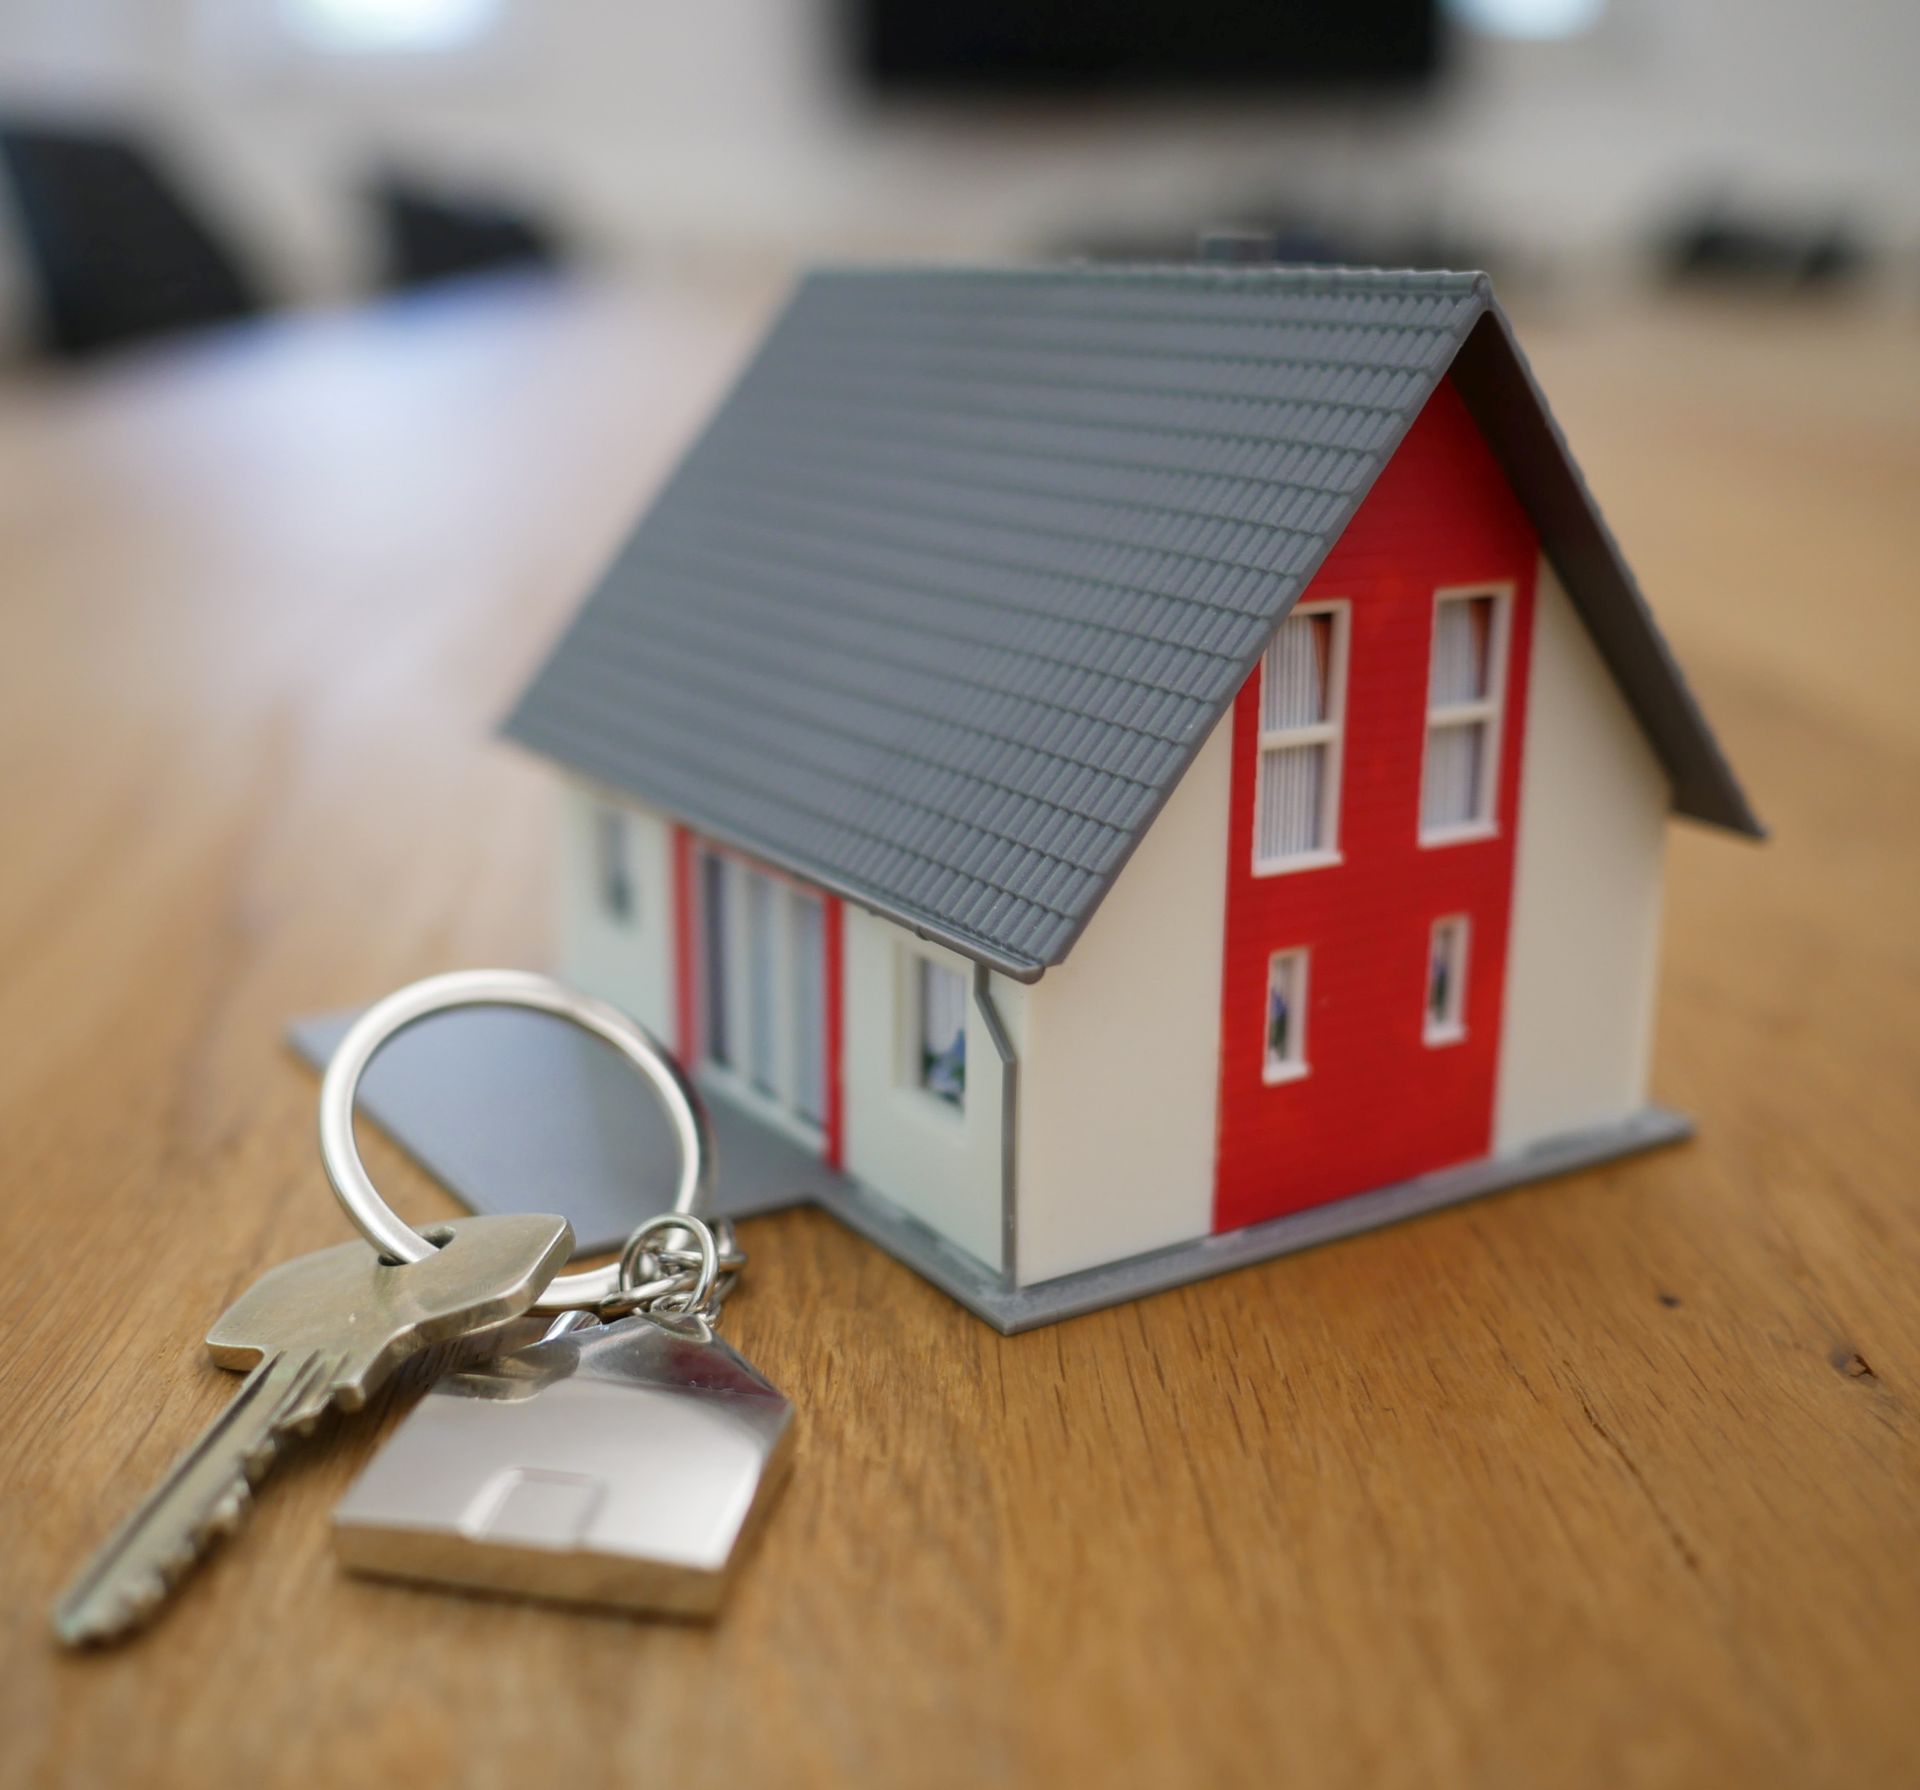 Small model house with a set  of keys